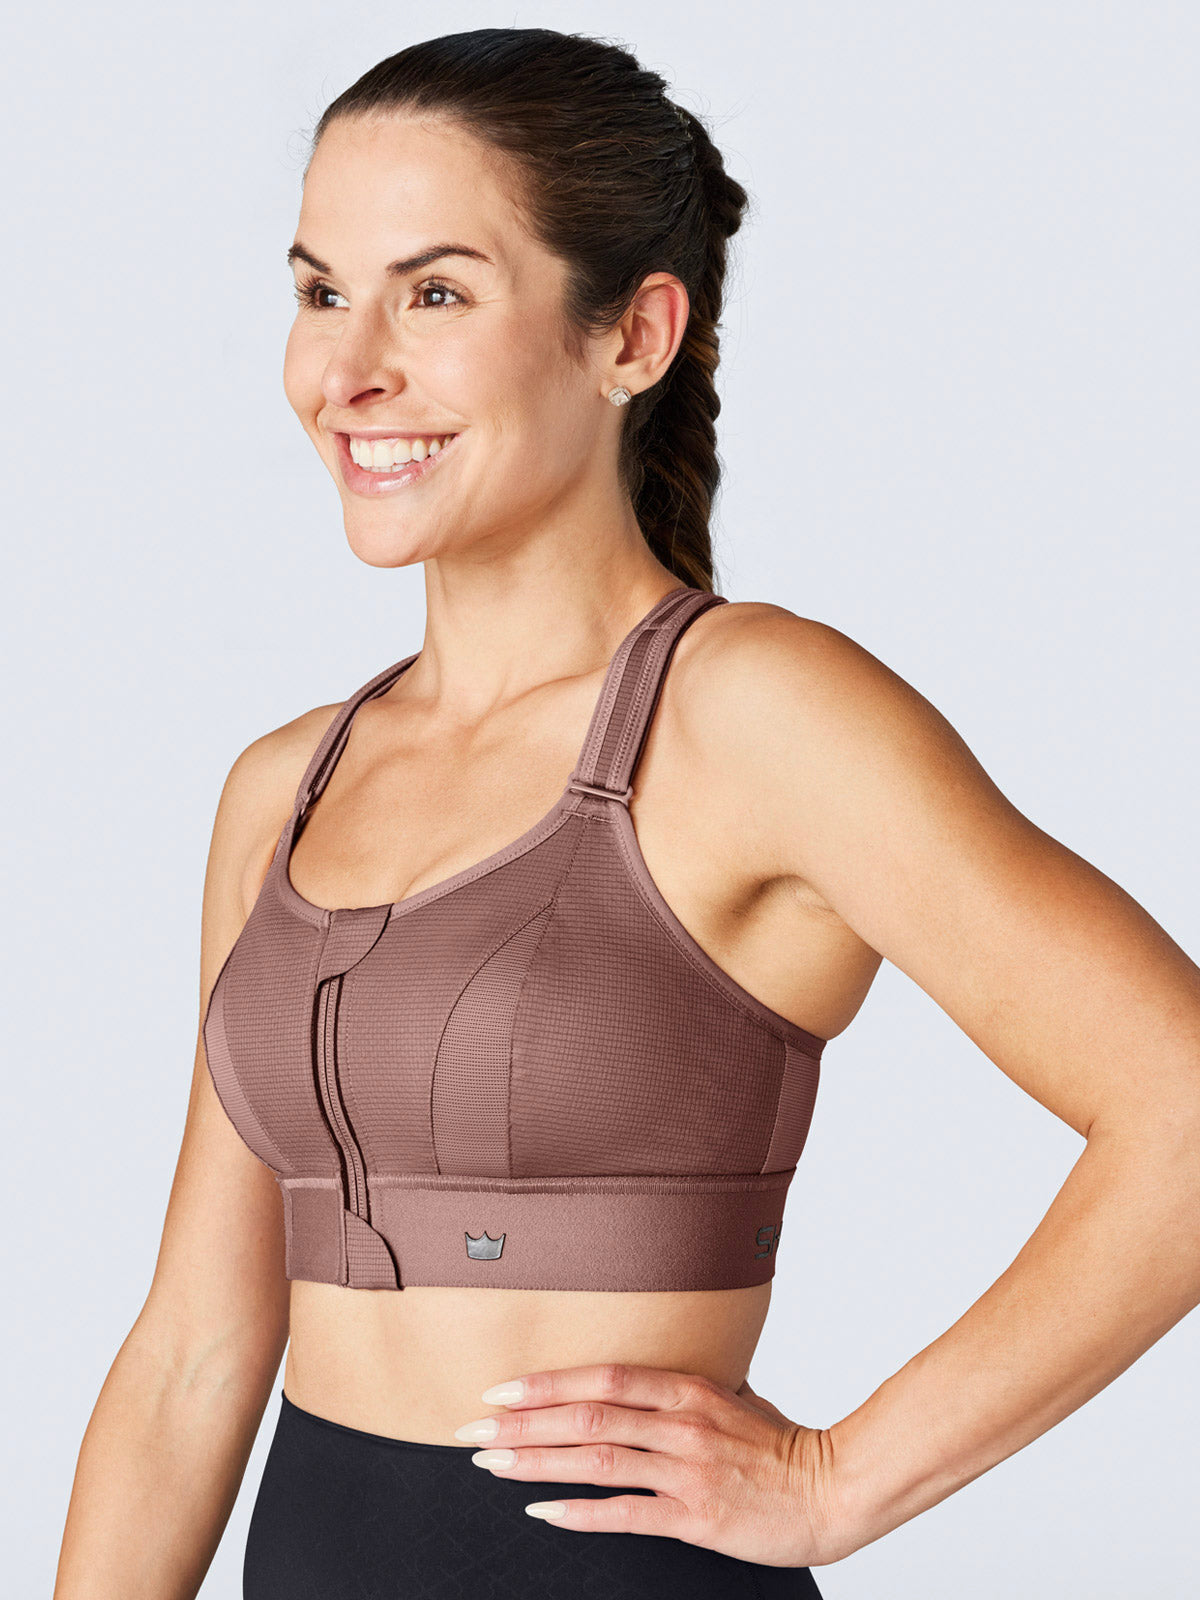 I'm obsessed with this $15 sports bra from : Along Fit crop